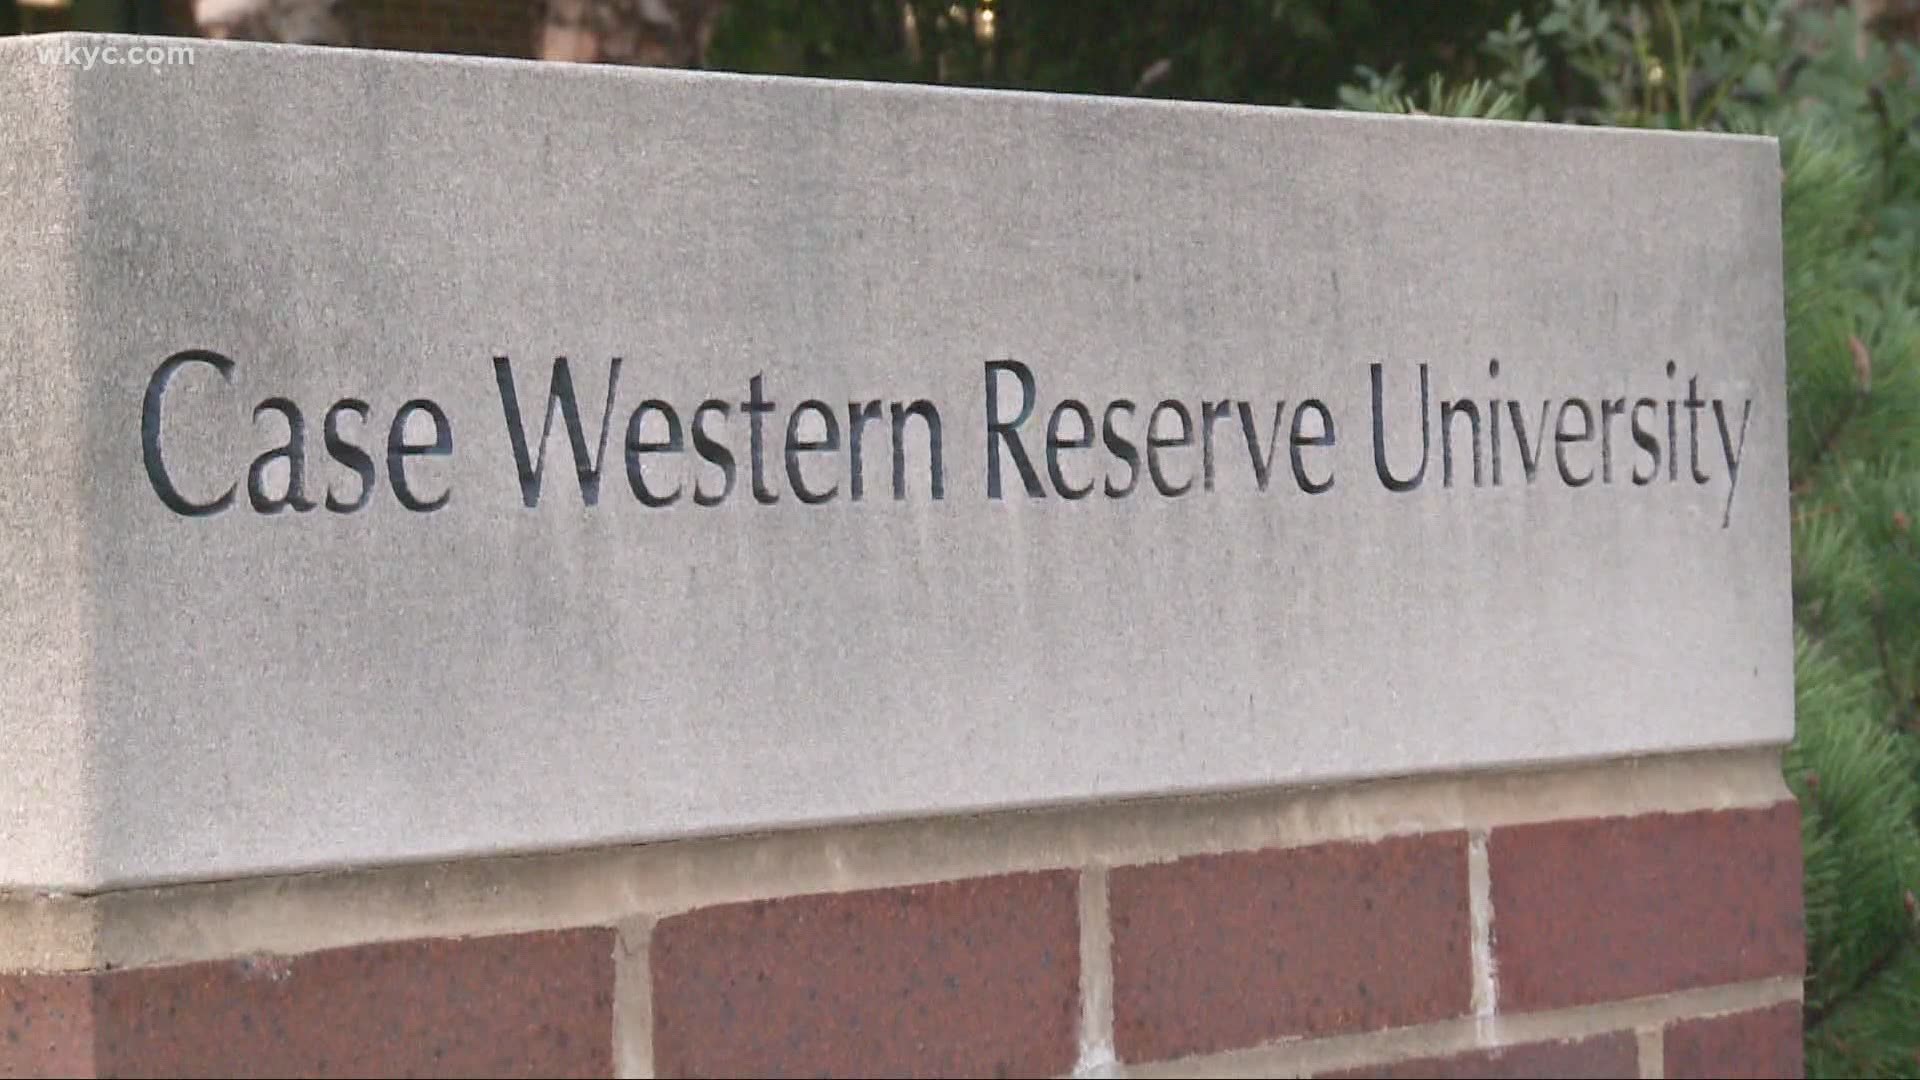 AP: Sirous Asgari had been indicted in 2016 then acquitted in November of trying to steal secret research from Case Western Reserve University.